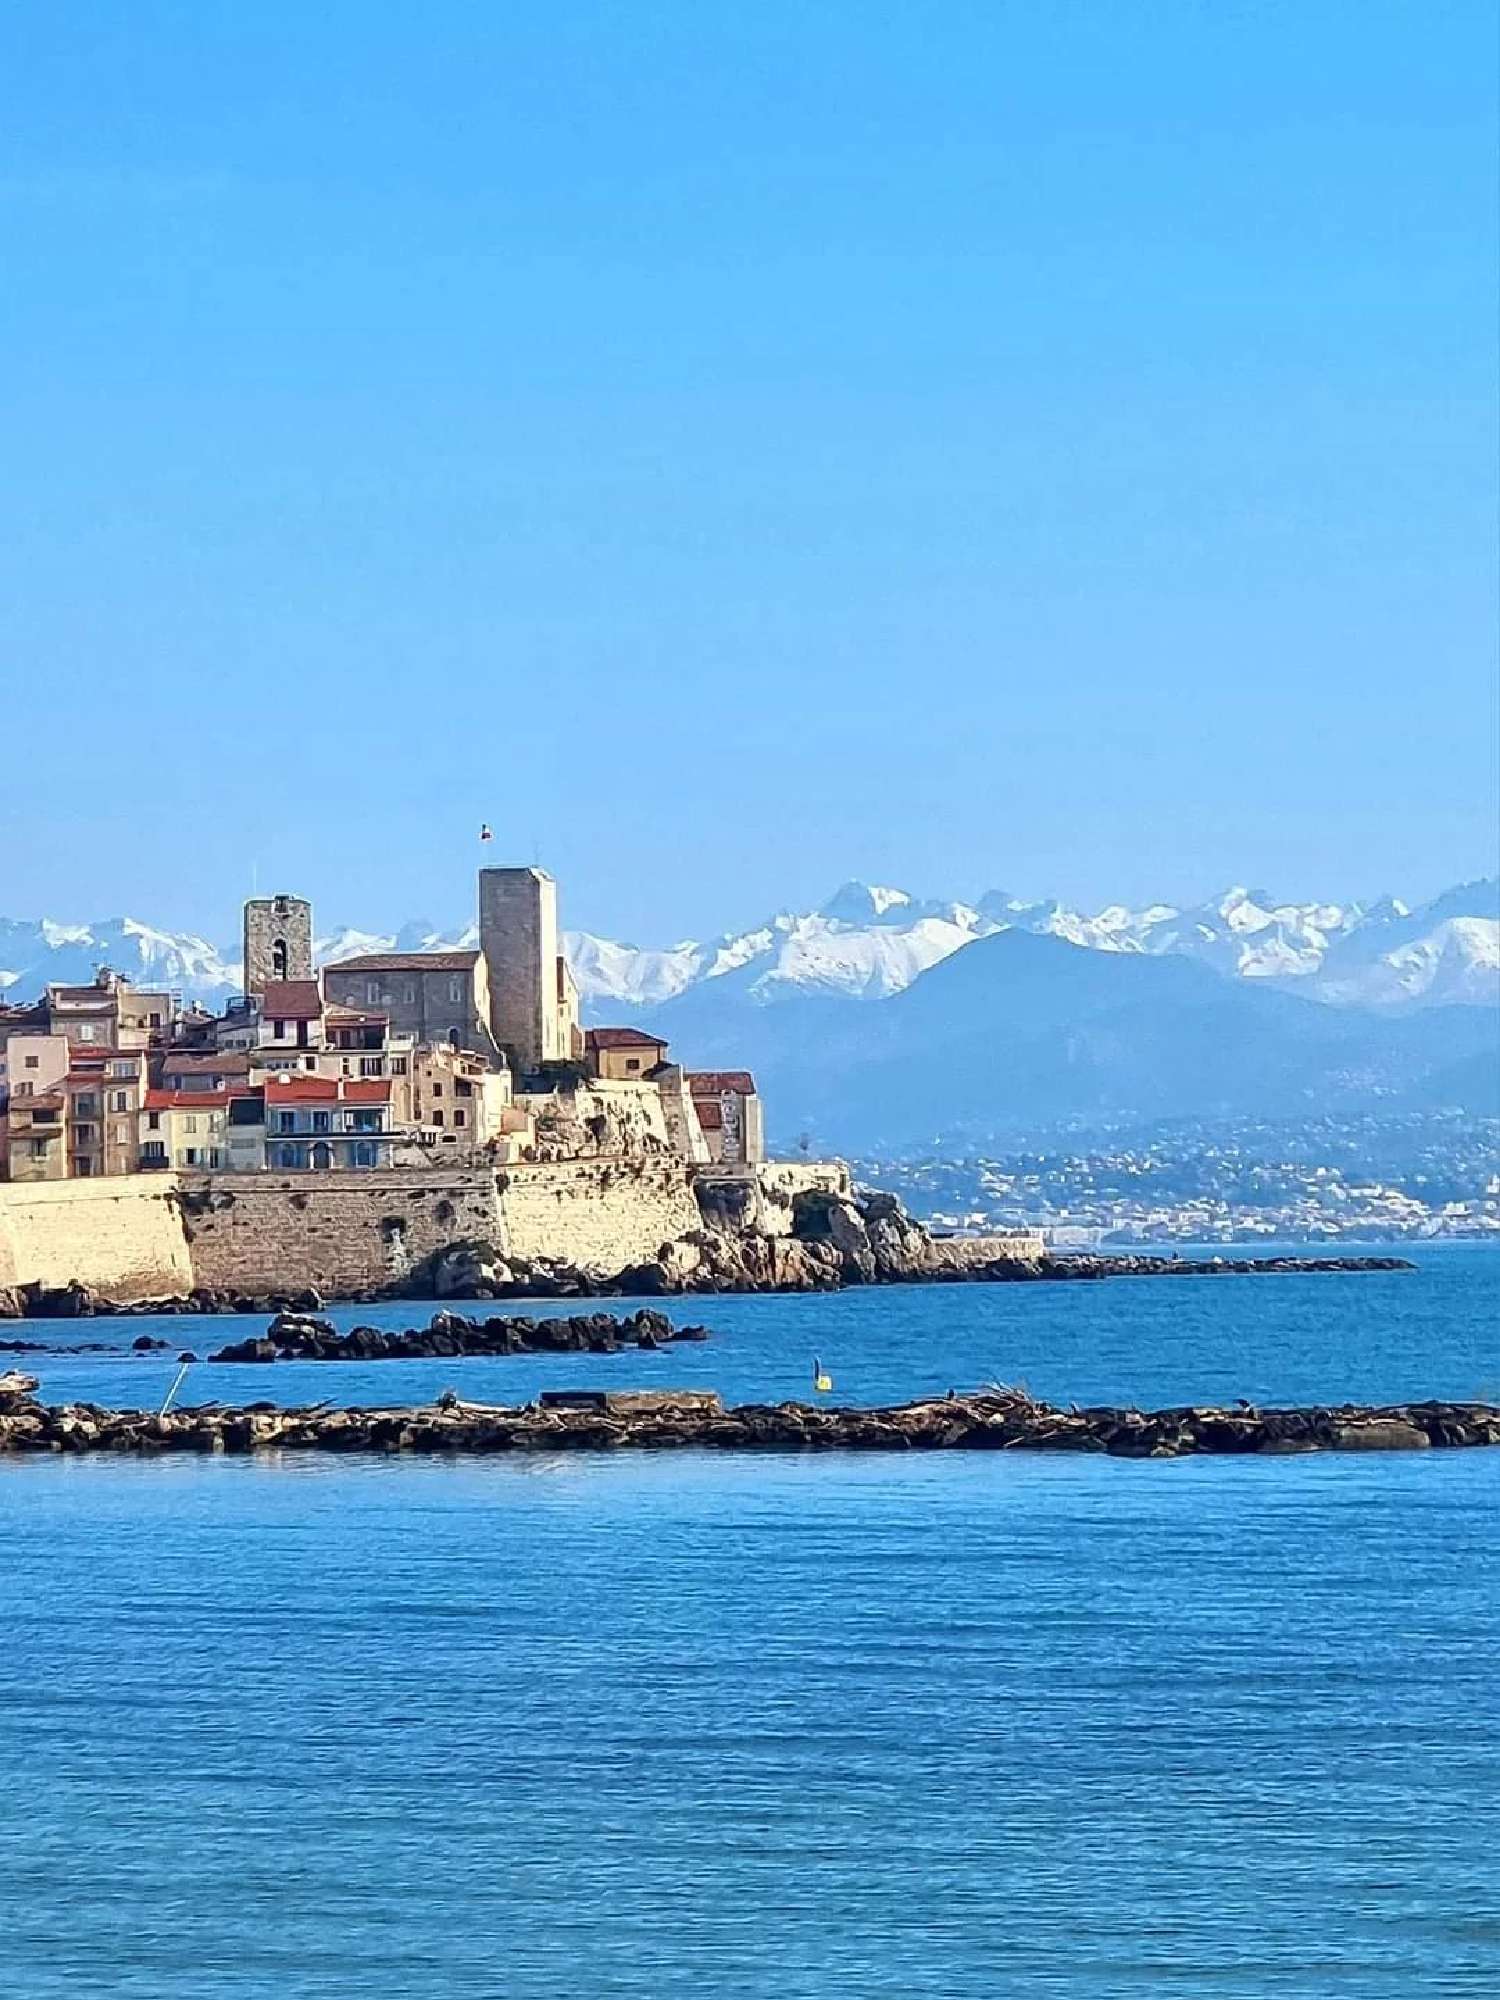  for sale house Antibes Alpes-Maritimes 3